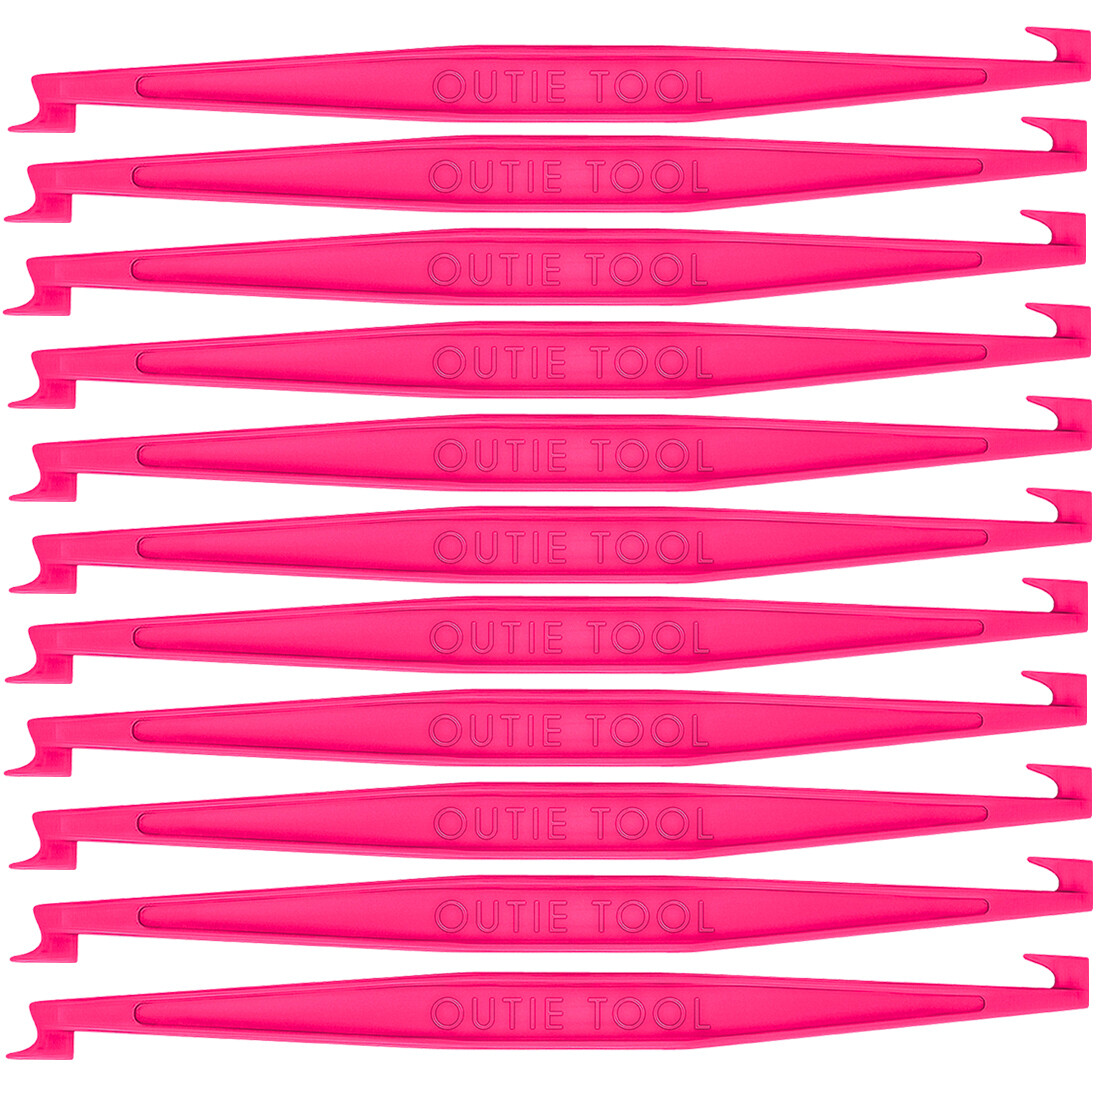 Outie Tool | 100 Individually Wrapped Singles | Hot Pink